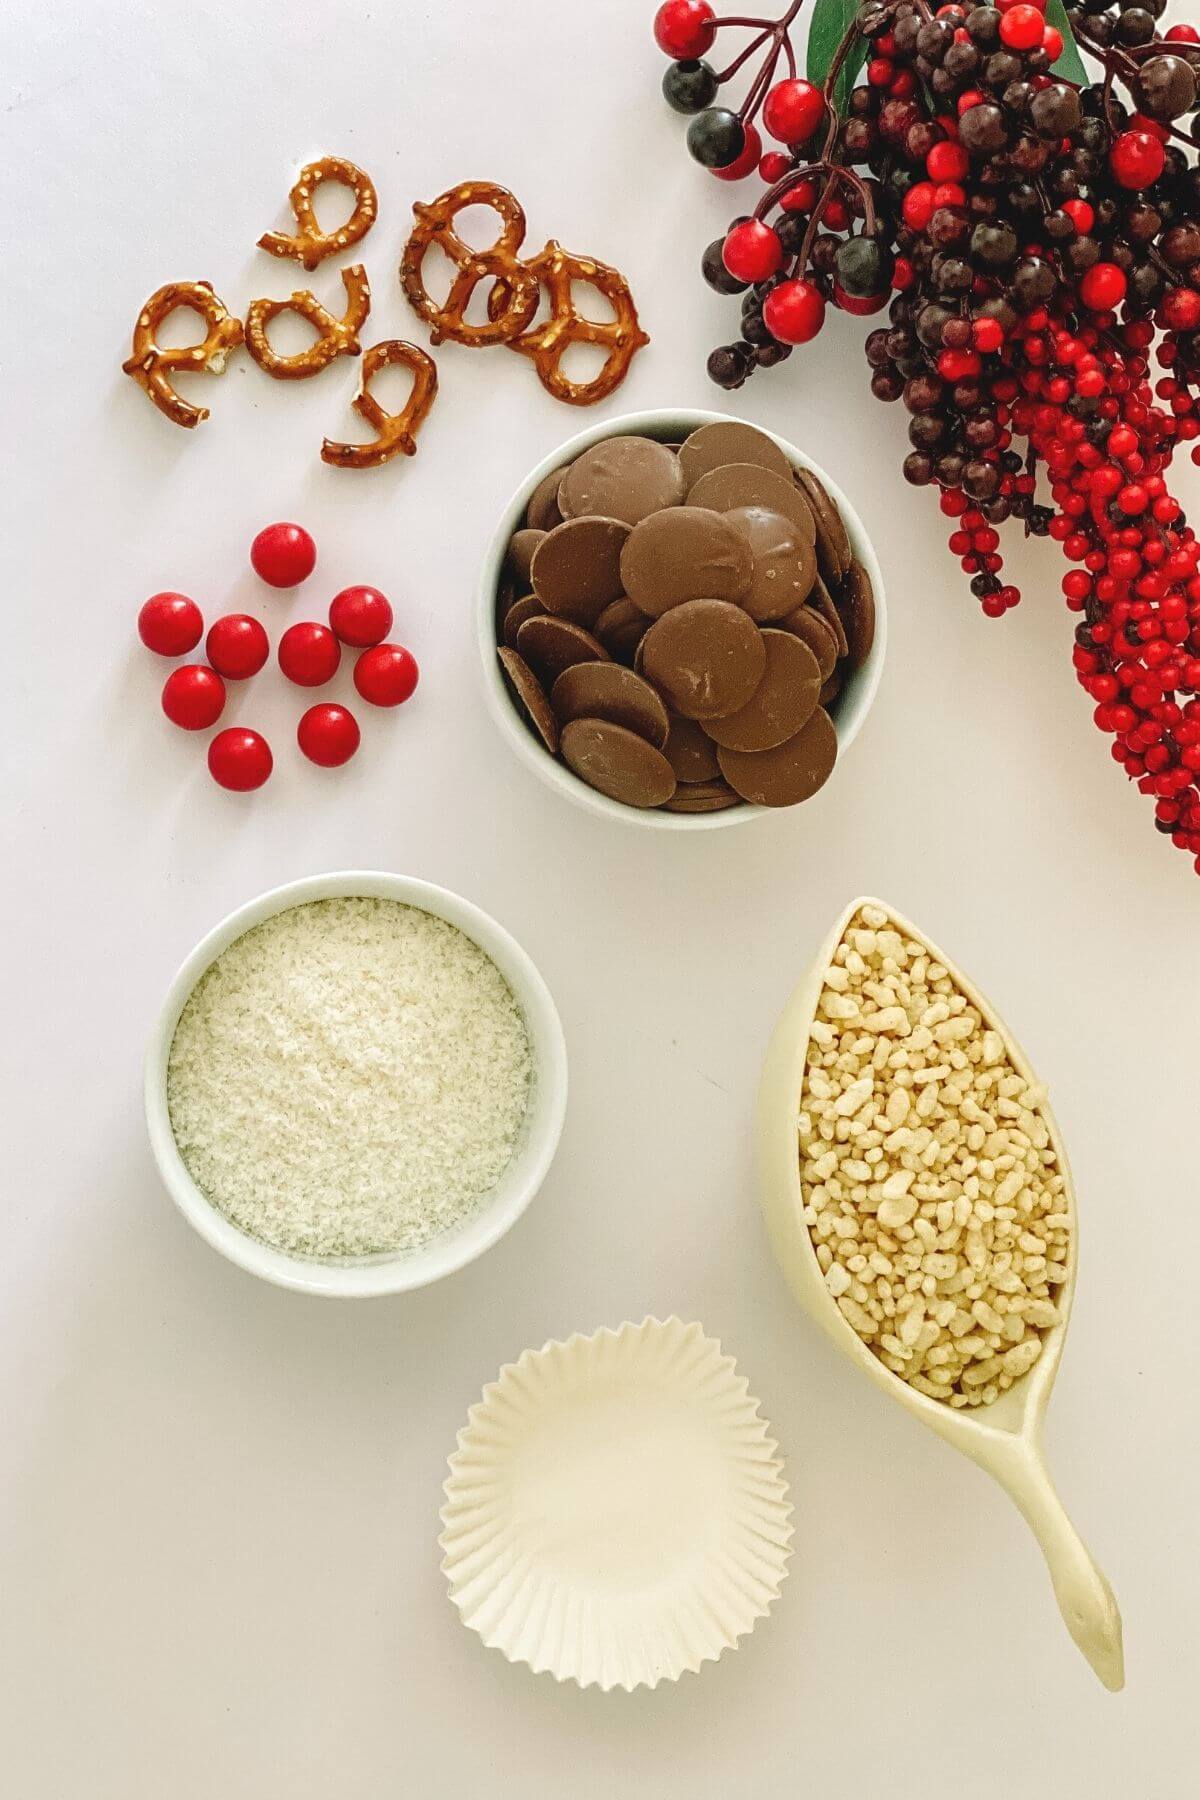 Ingredients for making chocolate christmas crackles